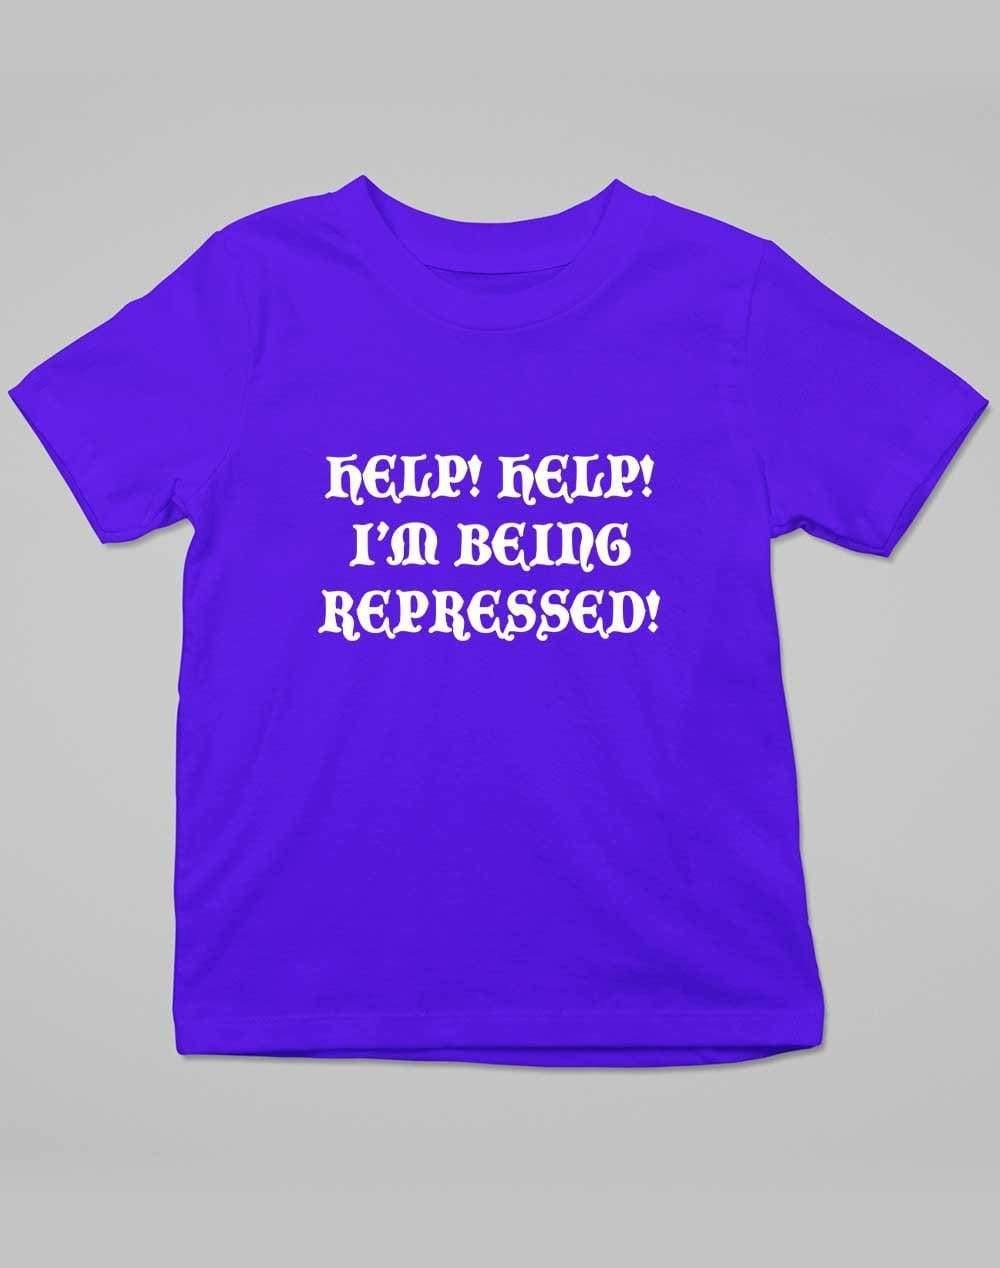 Help I'm Being Repressed Kids T-Shirt 3-4 years / Royal Blue  - Off World Tees